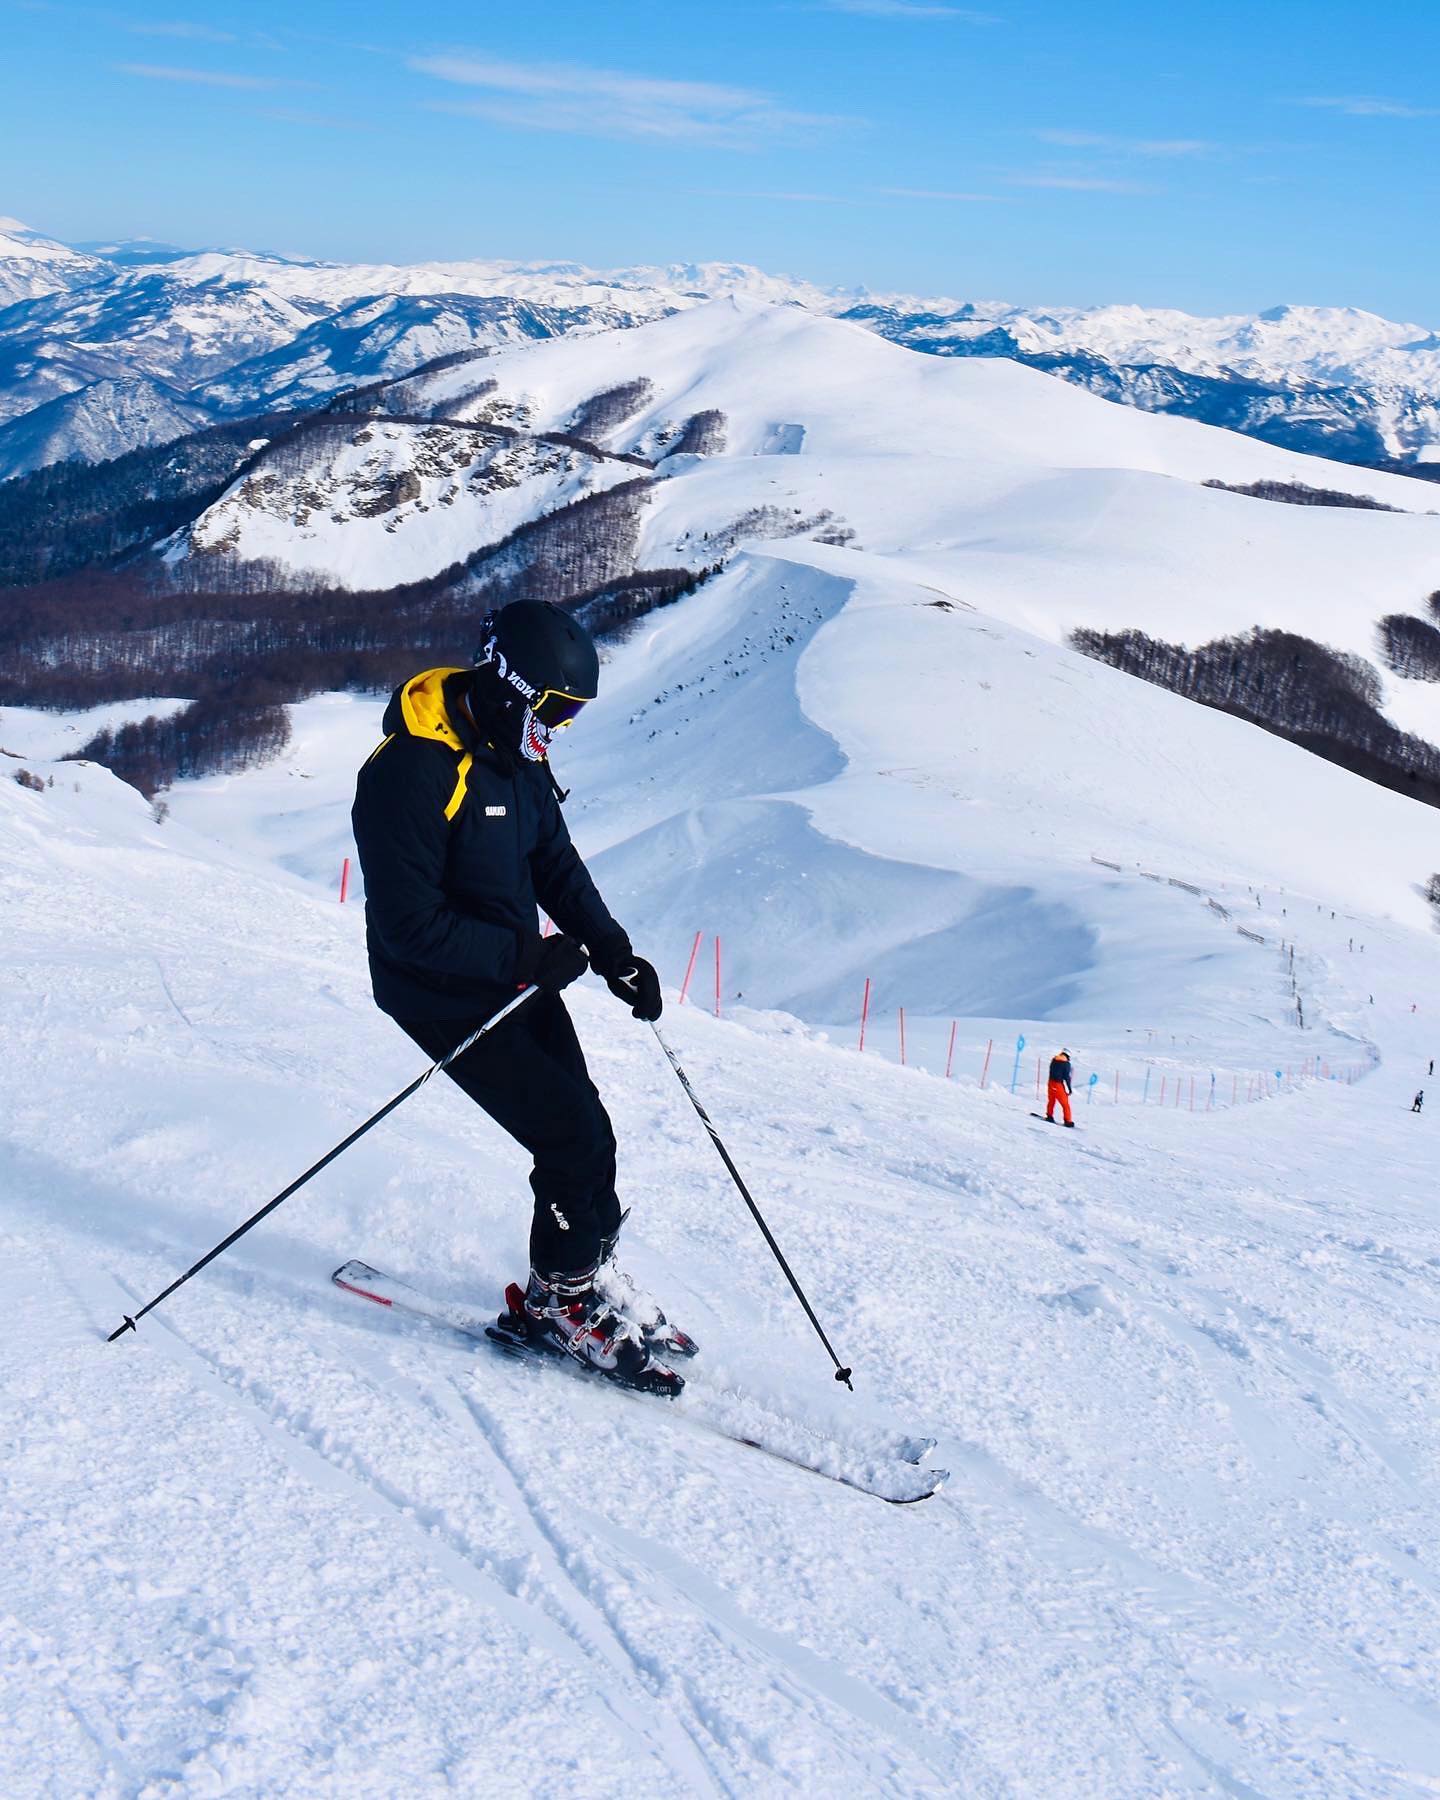 “Skiing is a dance, and the mountain always leads” ⛷ Top European Ski Resorts